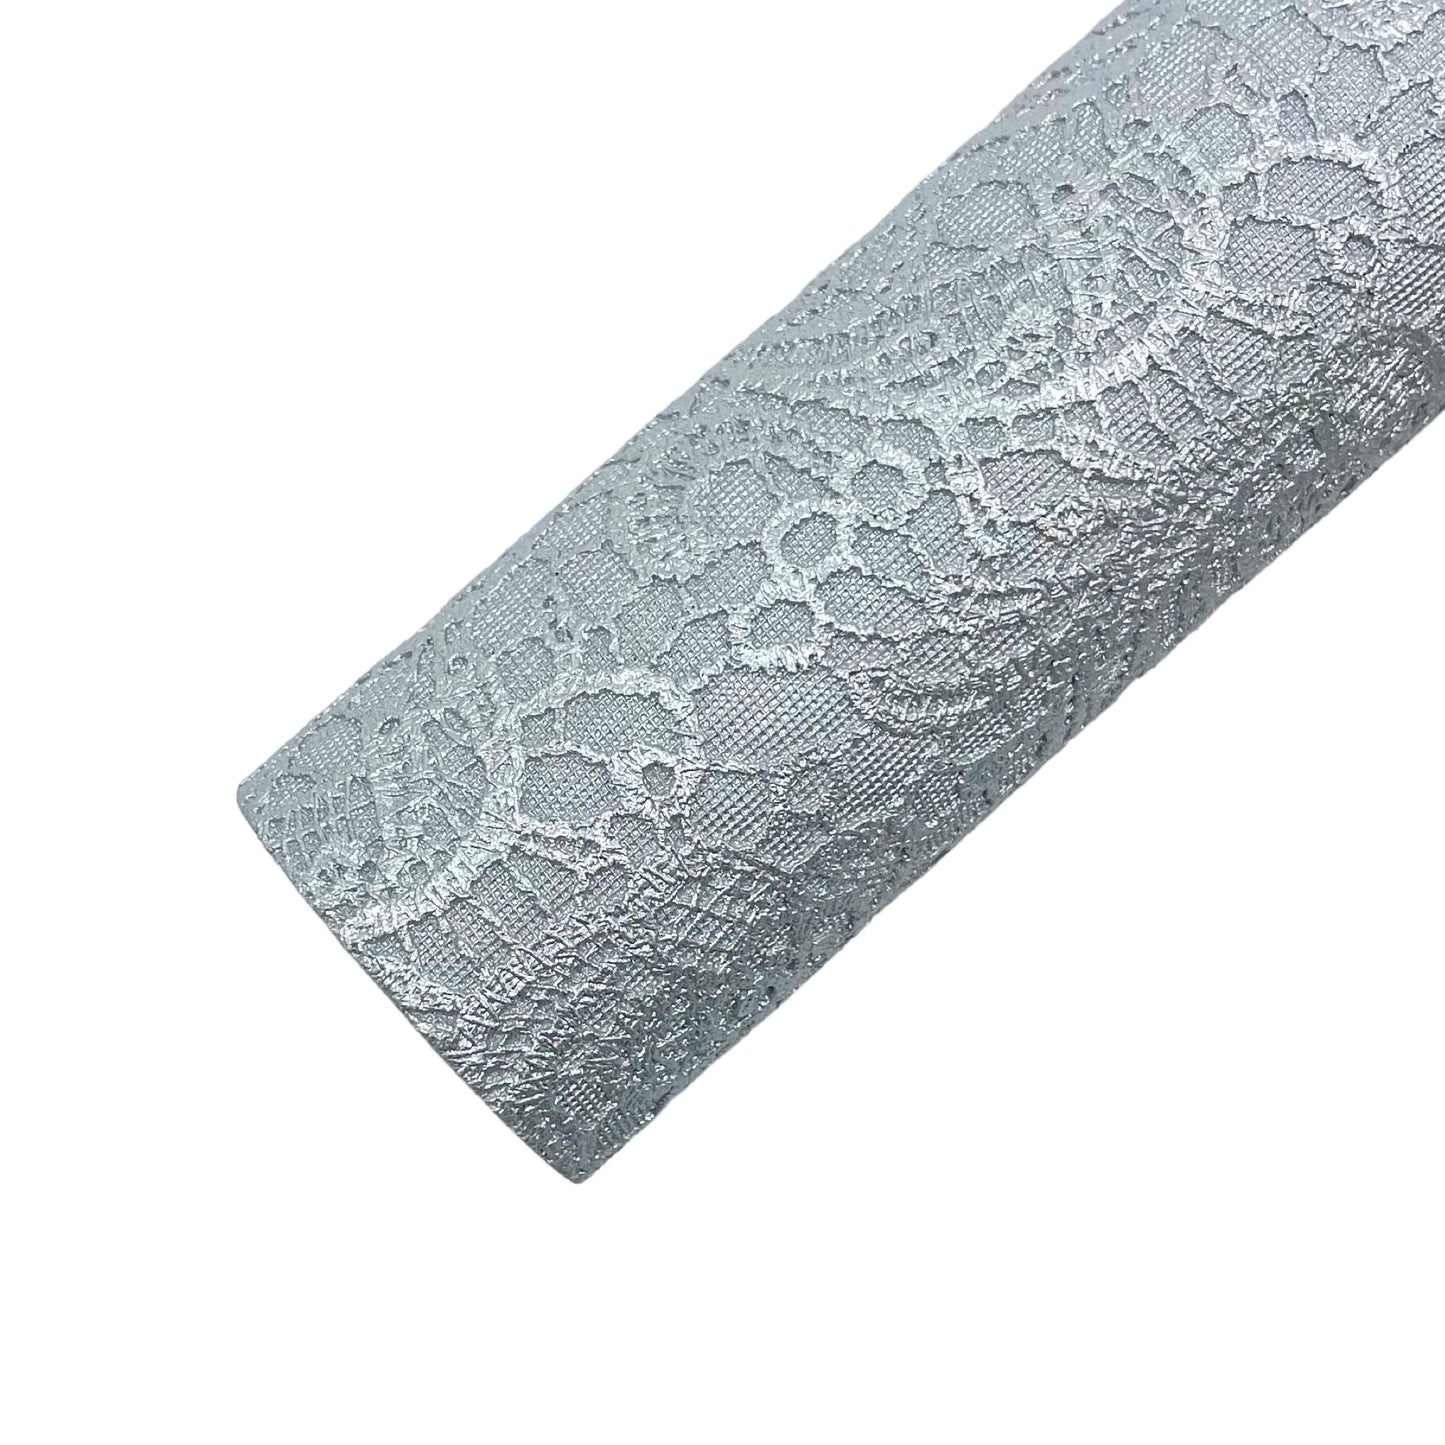 Rolled silver metallic embossed lace faux leather sheet.